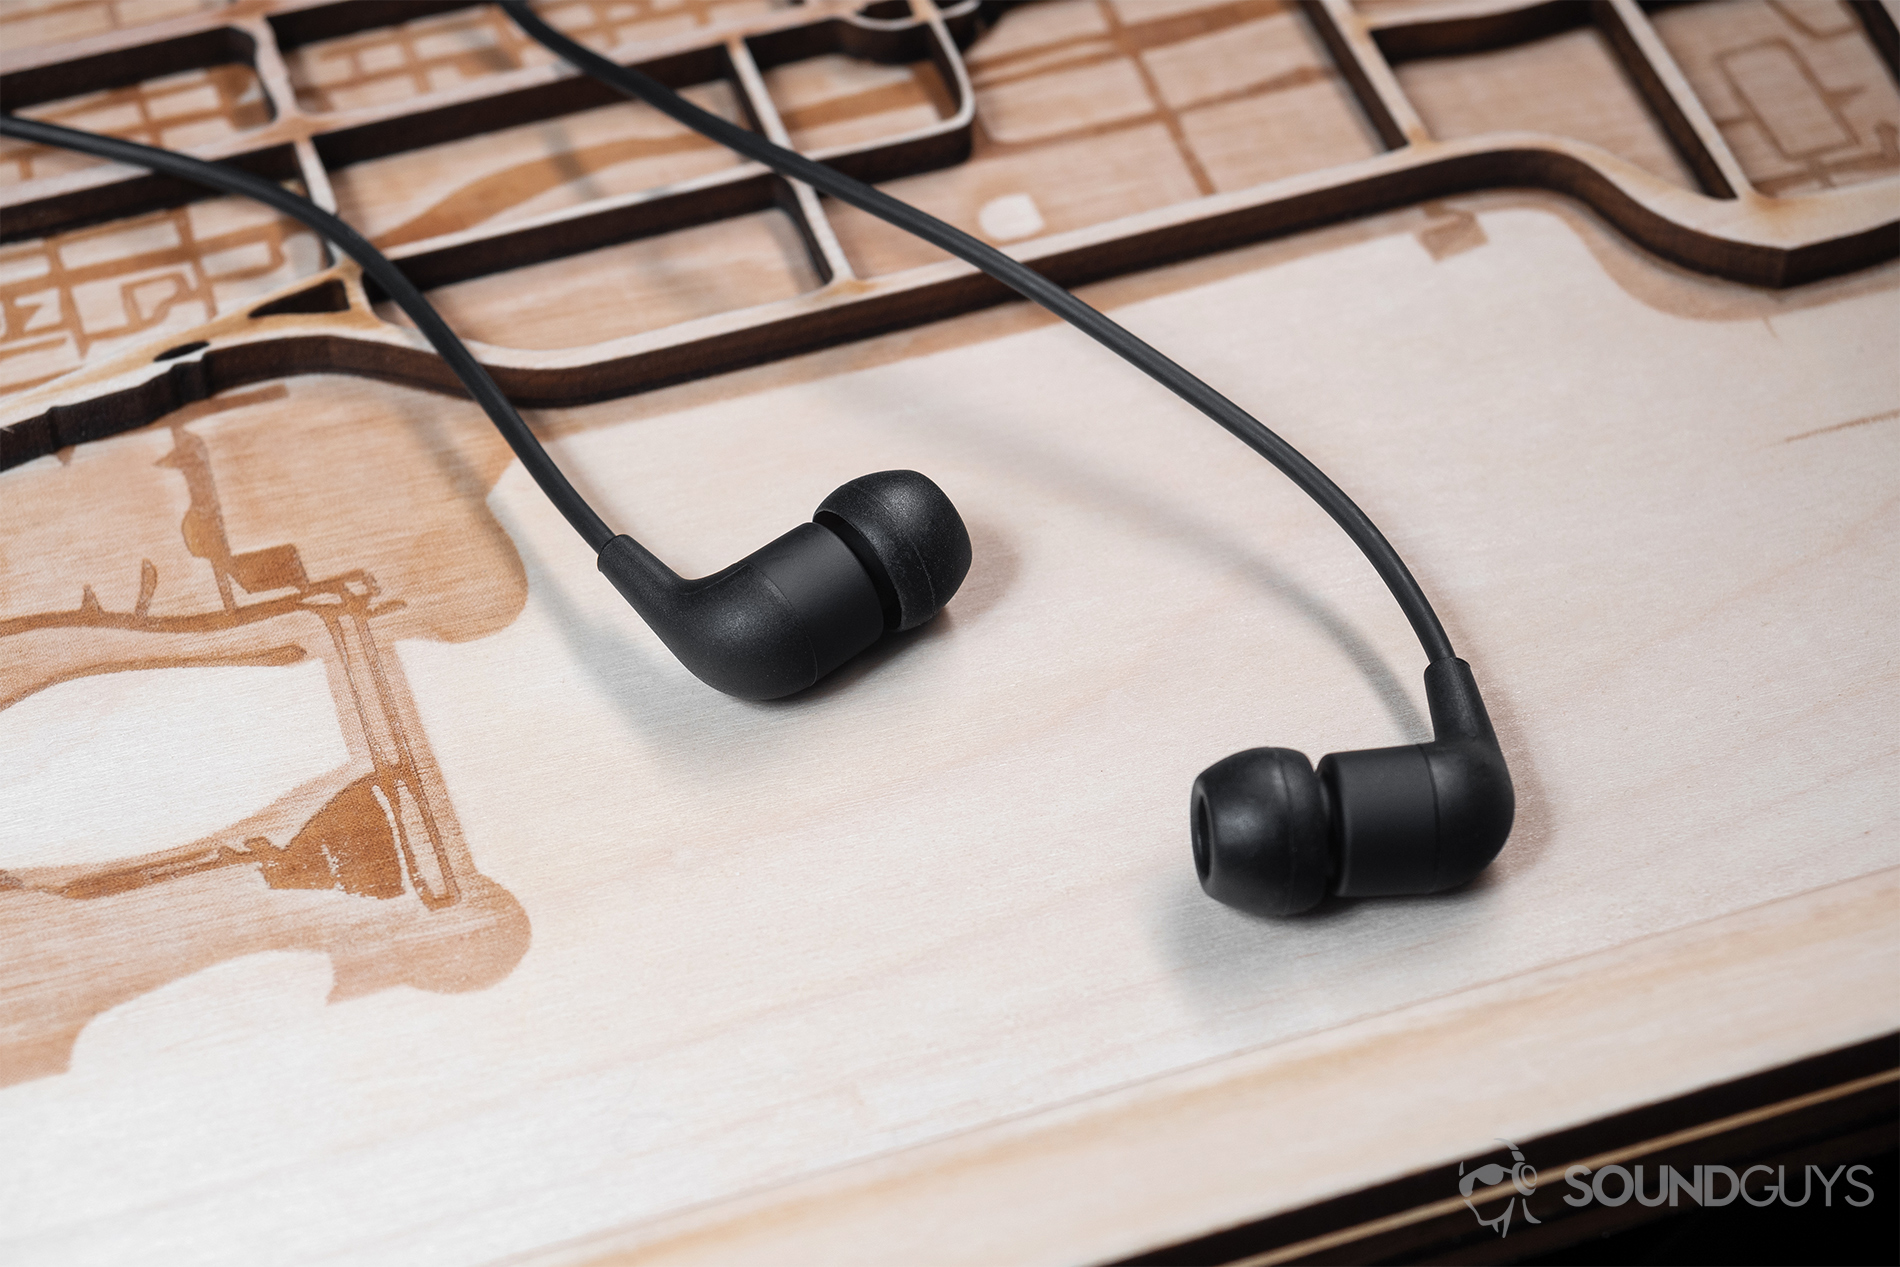 AiAiAi Pipe 2.0: Top-down image of the earbuds in black on a laser-cut wood surface.